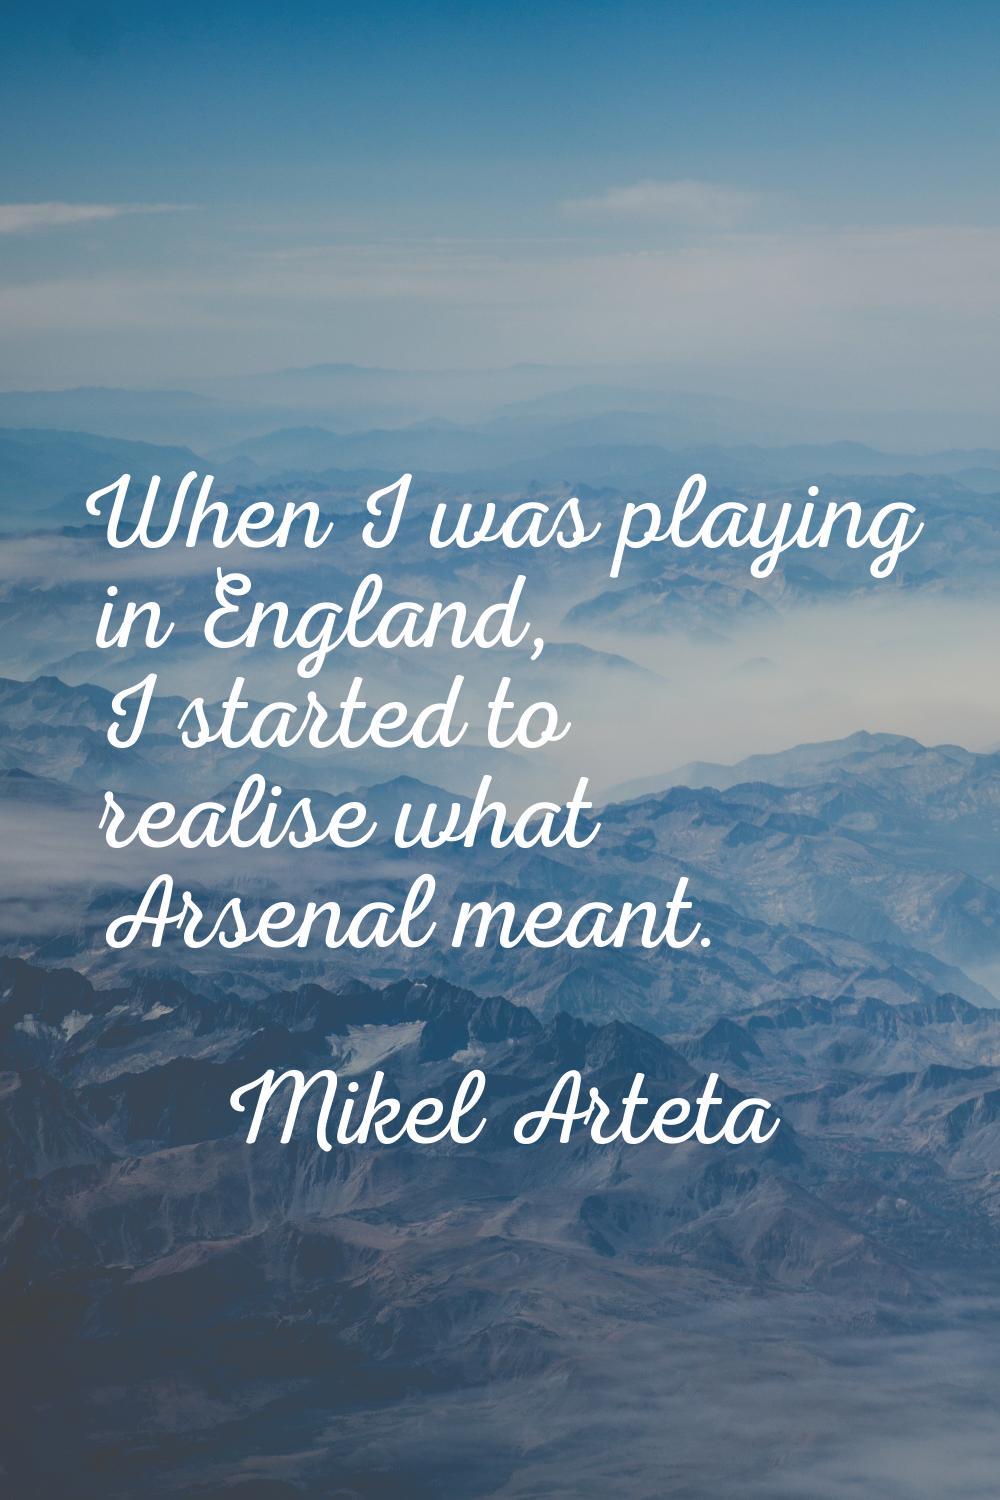 When I was playing in England, I started to realise what Arsenal meant.